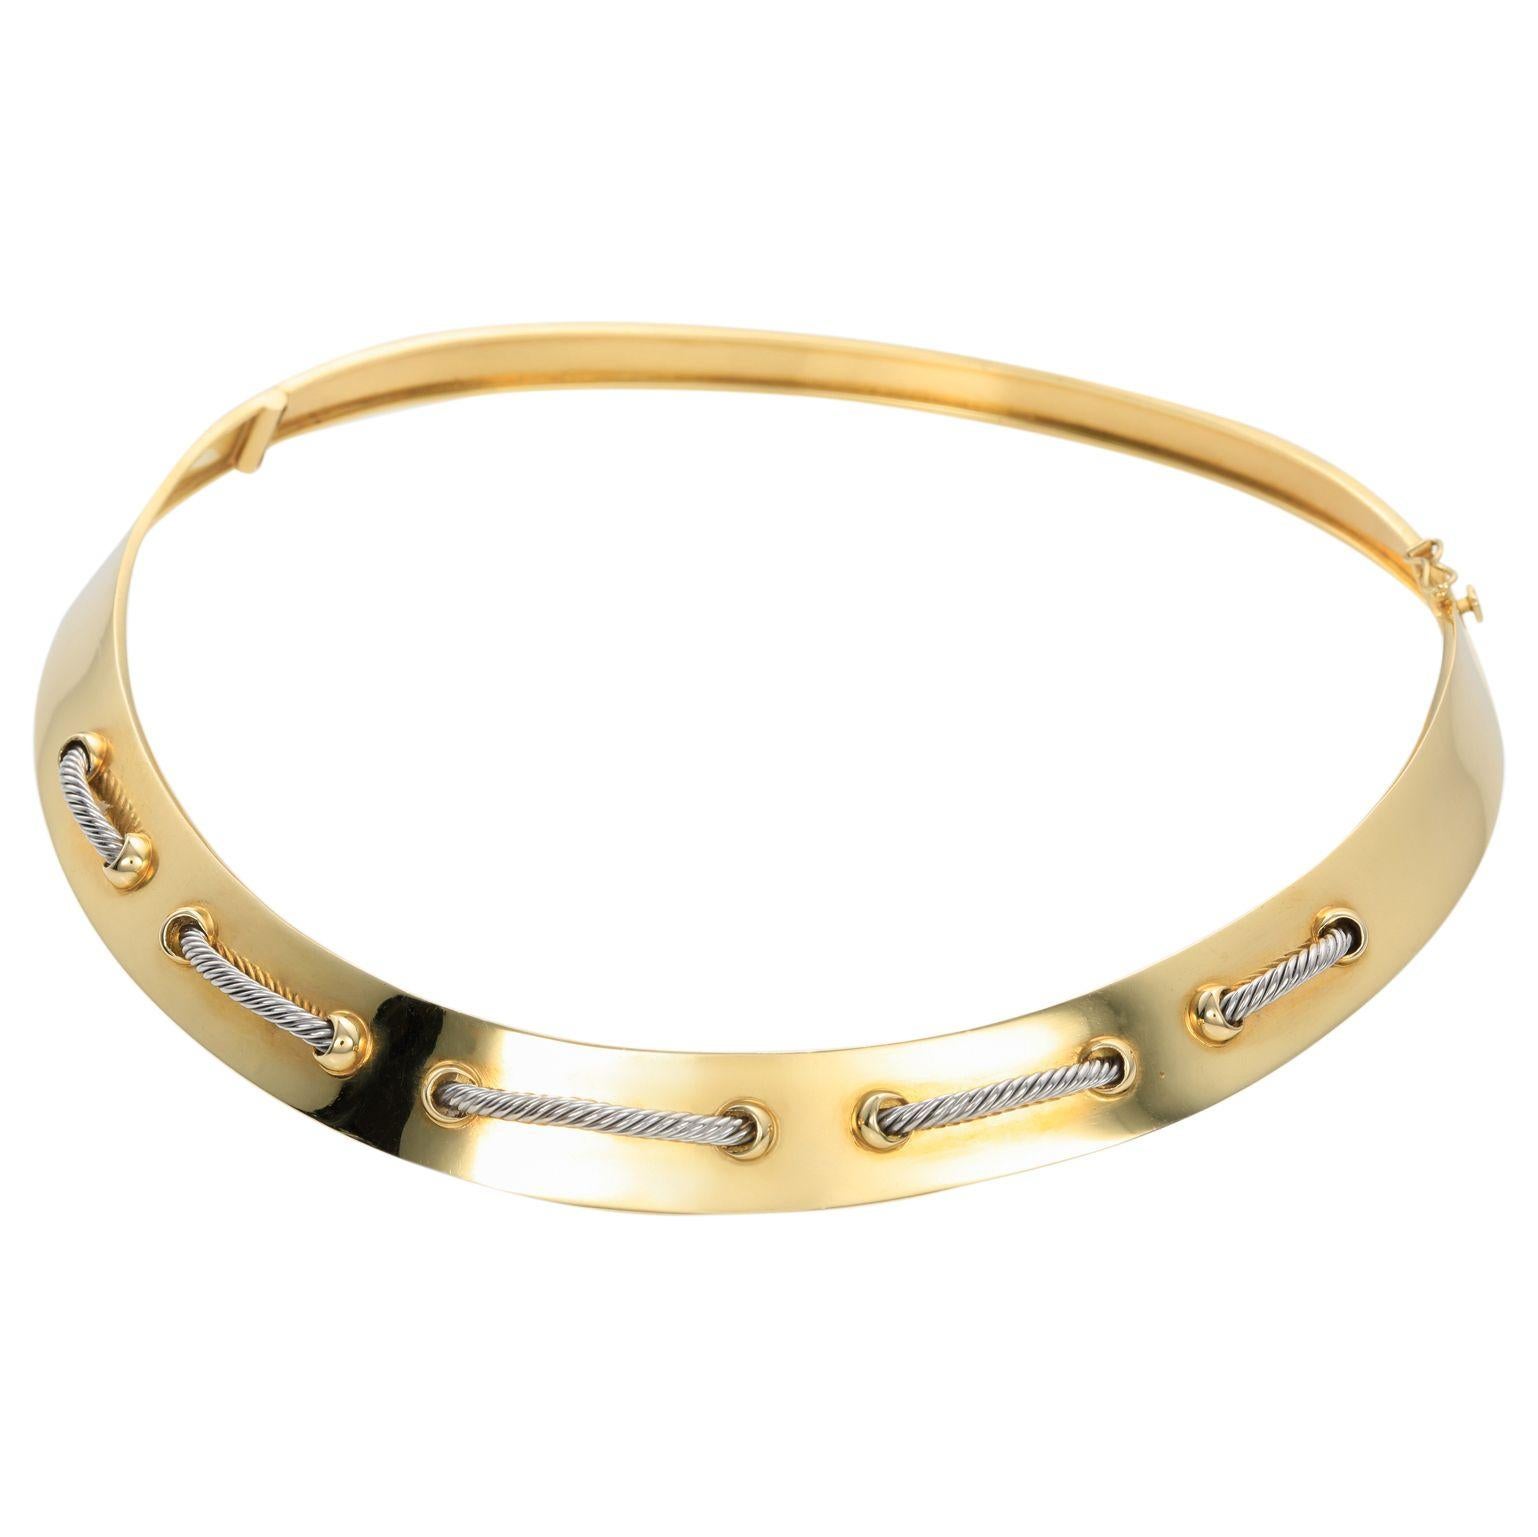 This collar is exceptional, so wearable for every occasion. It works well for a casual lunch with jeans and a T shirt or team it up with day wear for the races. It can even work with a simple black evening gown - don't you just love when jewels can